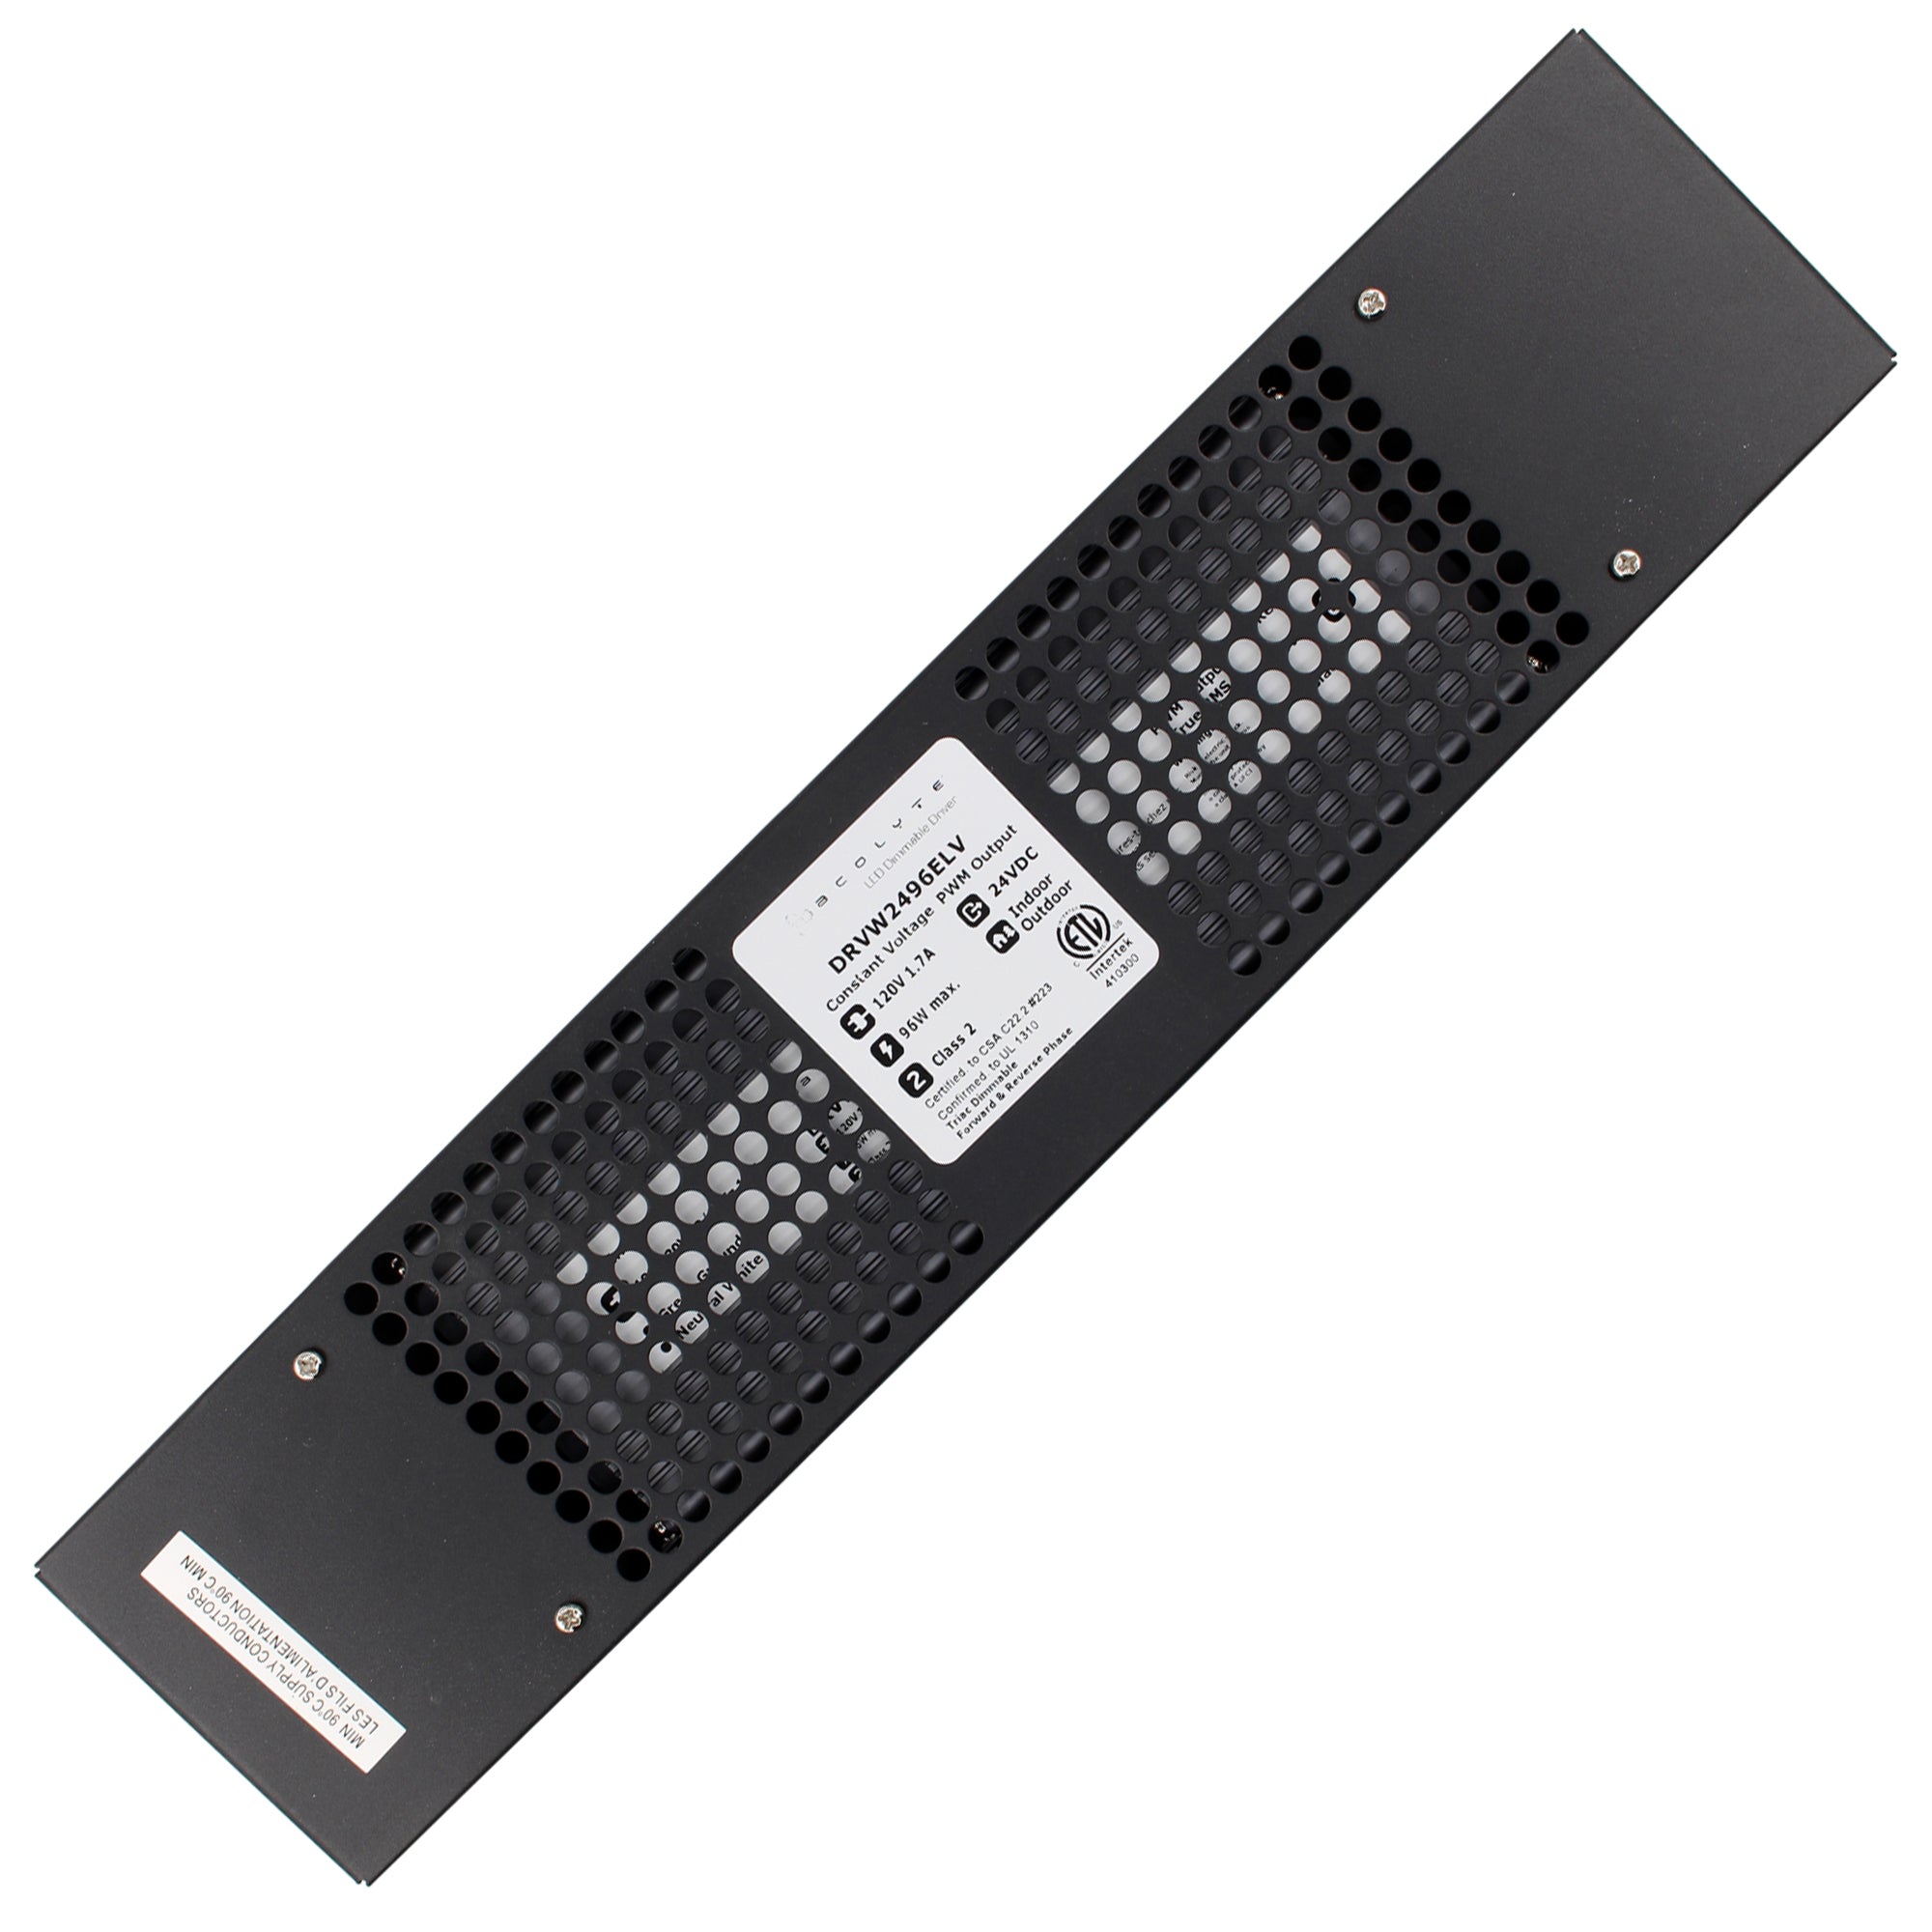 Acolyte, ACOLYTE DRVW2496ELV DIMMABLE CONSTANT VOLTAGE LED DRIVER, PWM, 24VDC, 96W, 120V